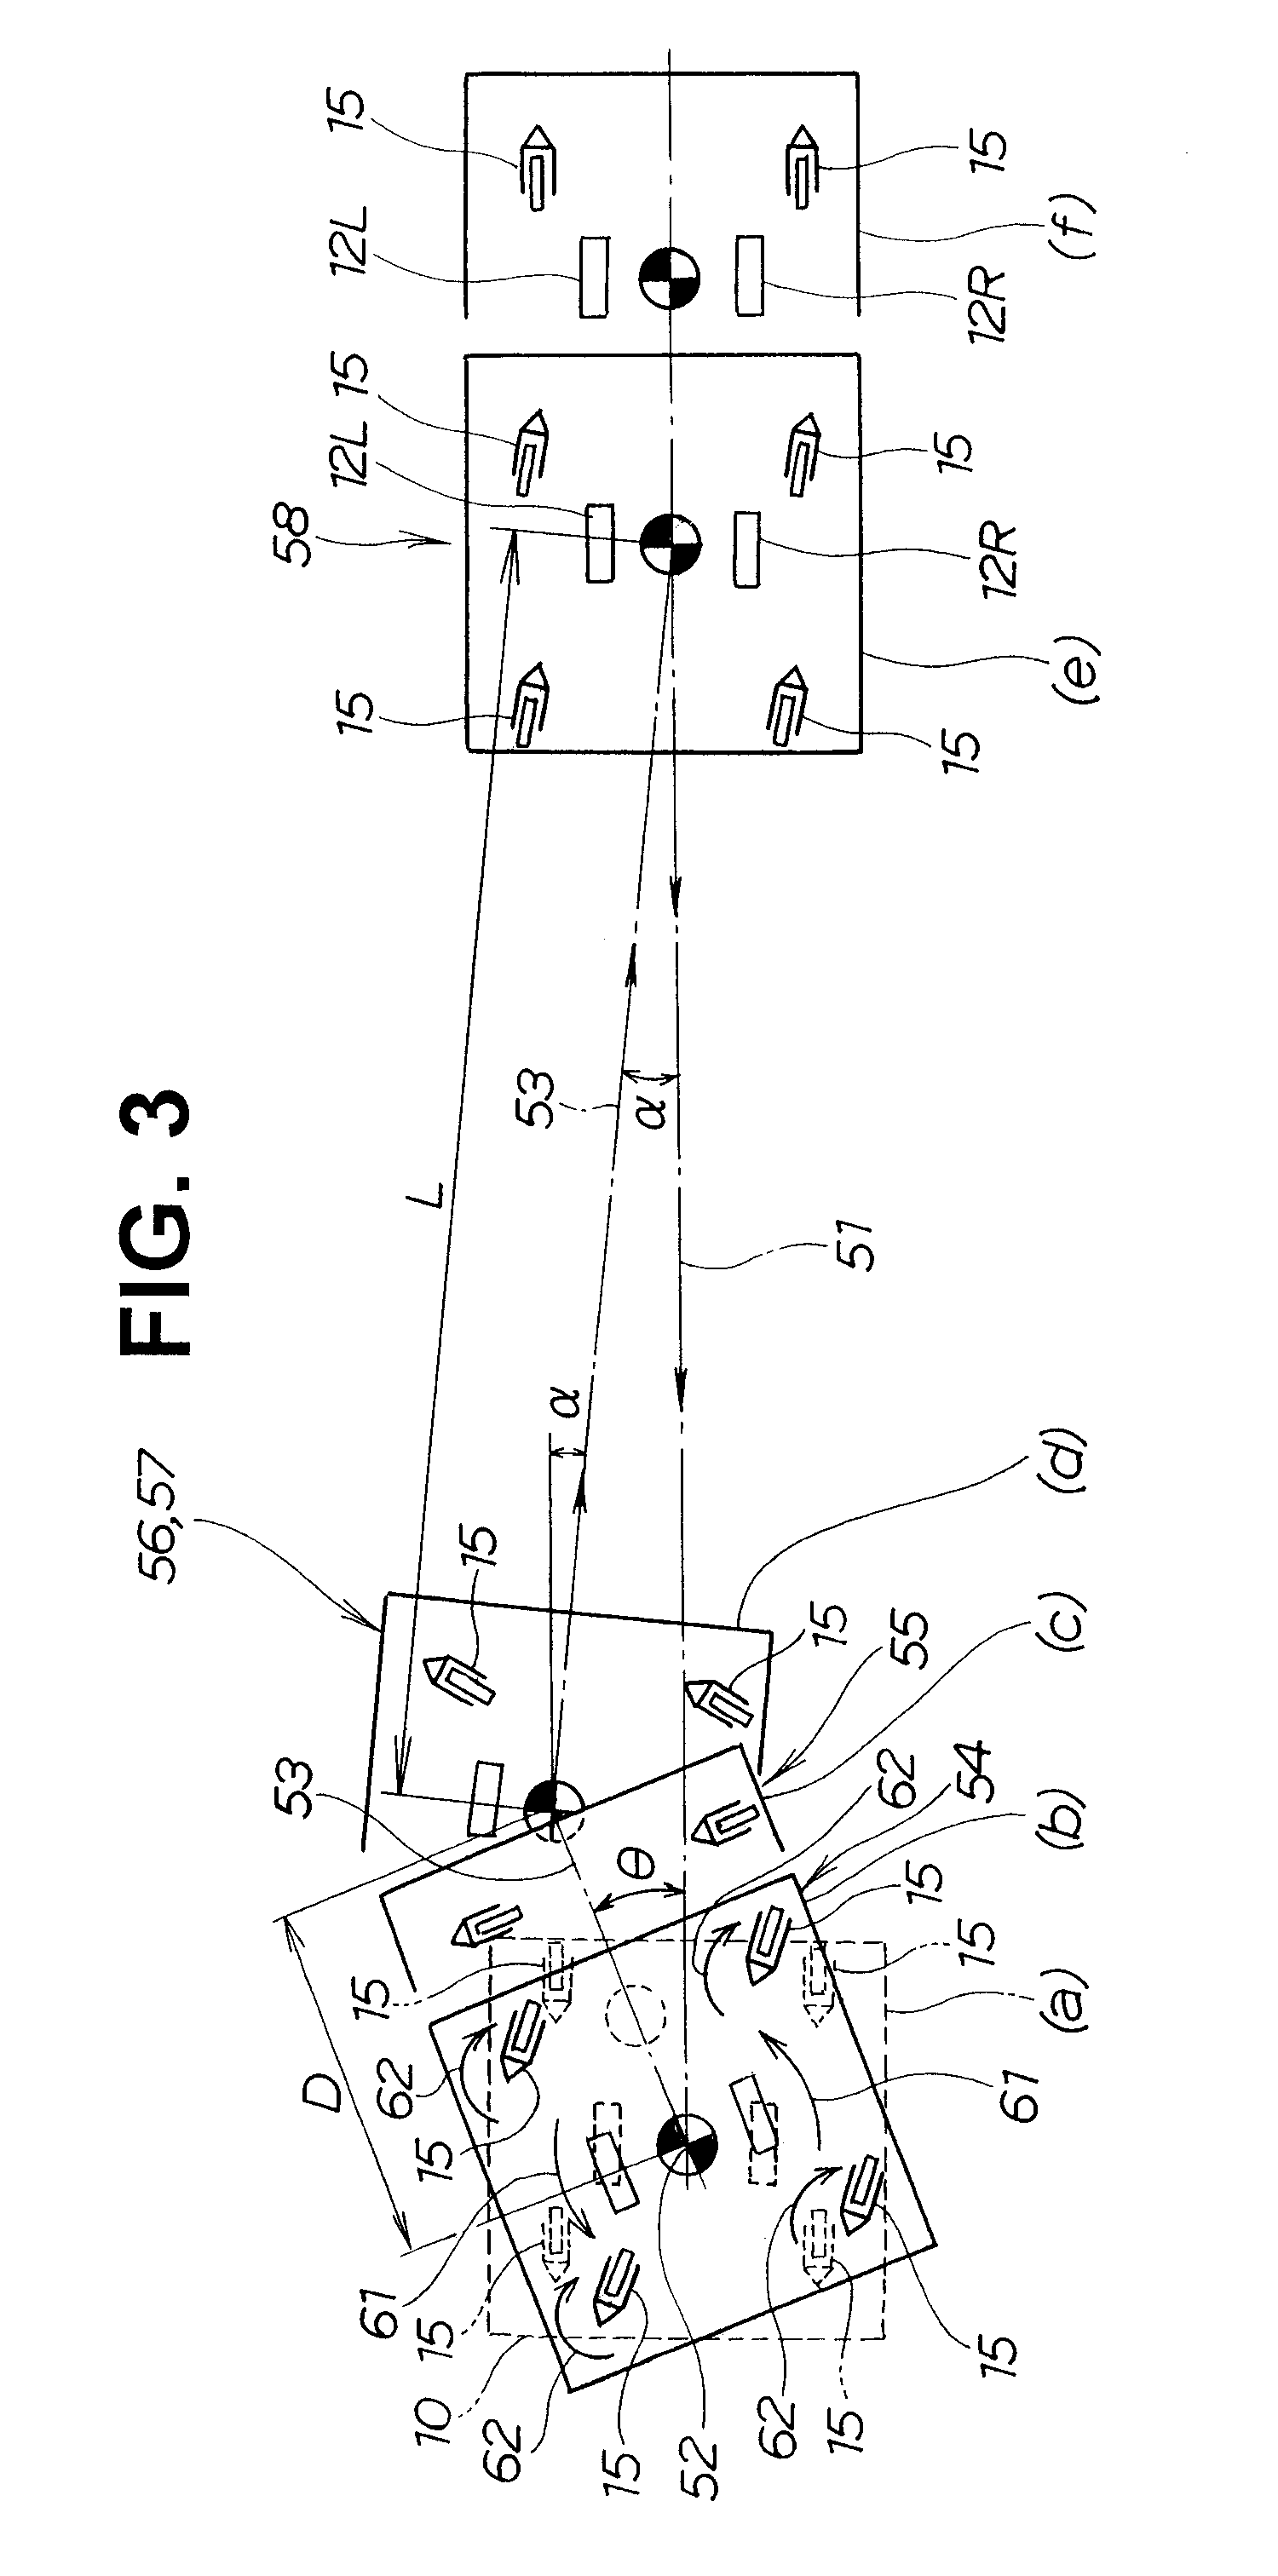 Travel Control Method For Self-Propelled Carriage